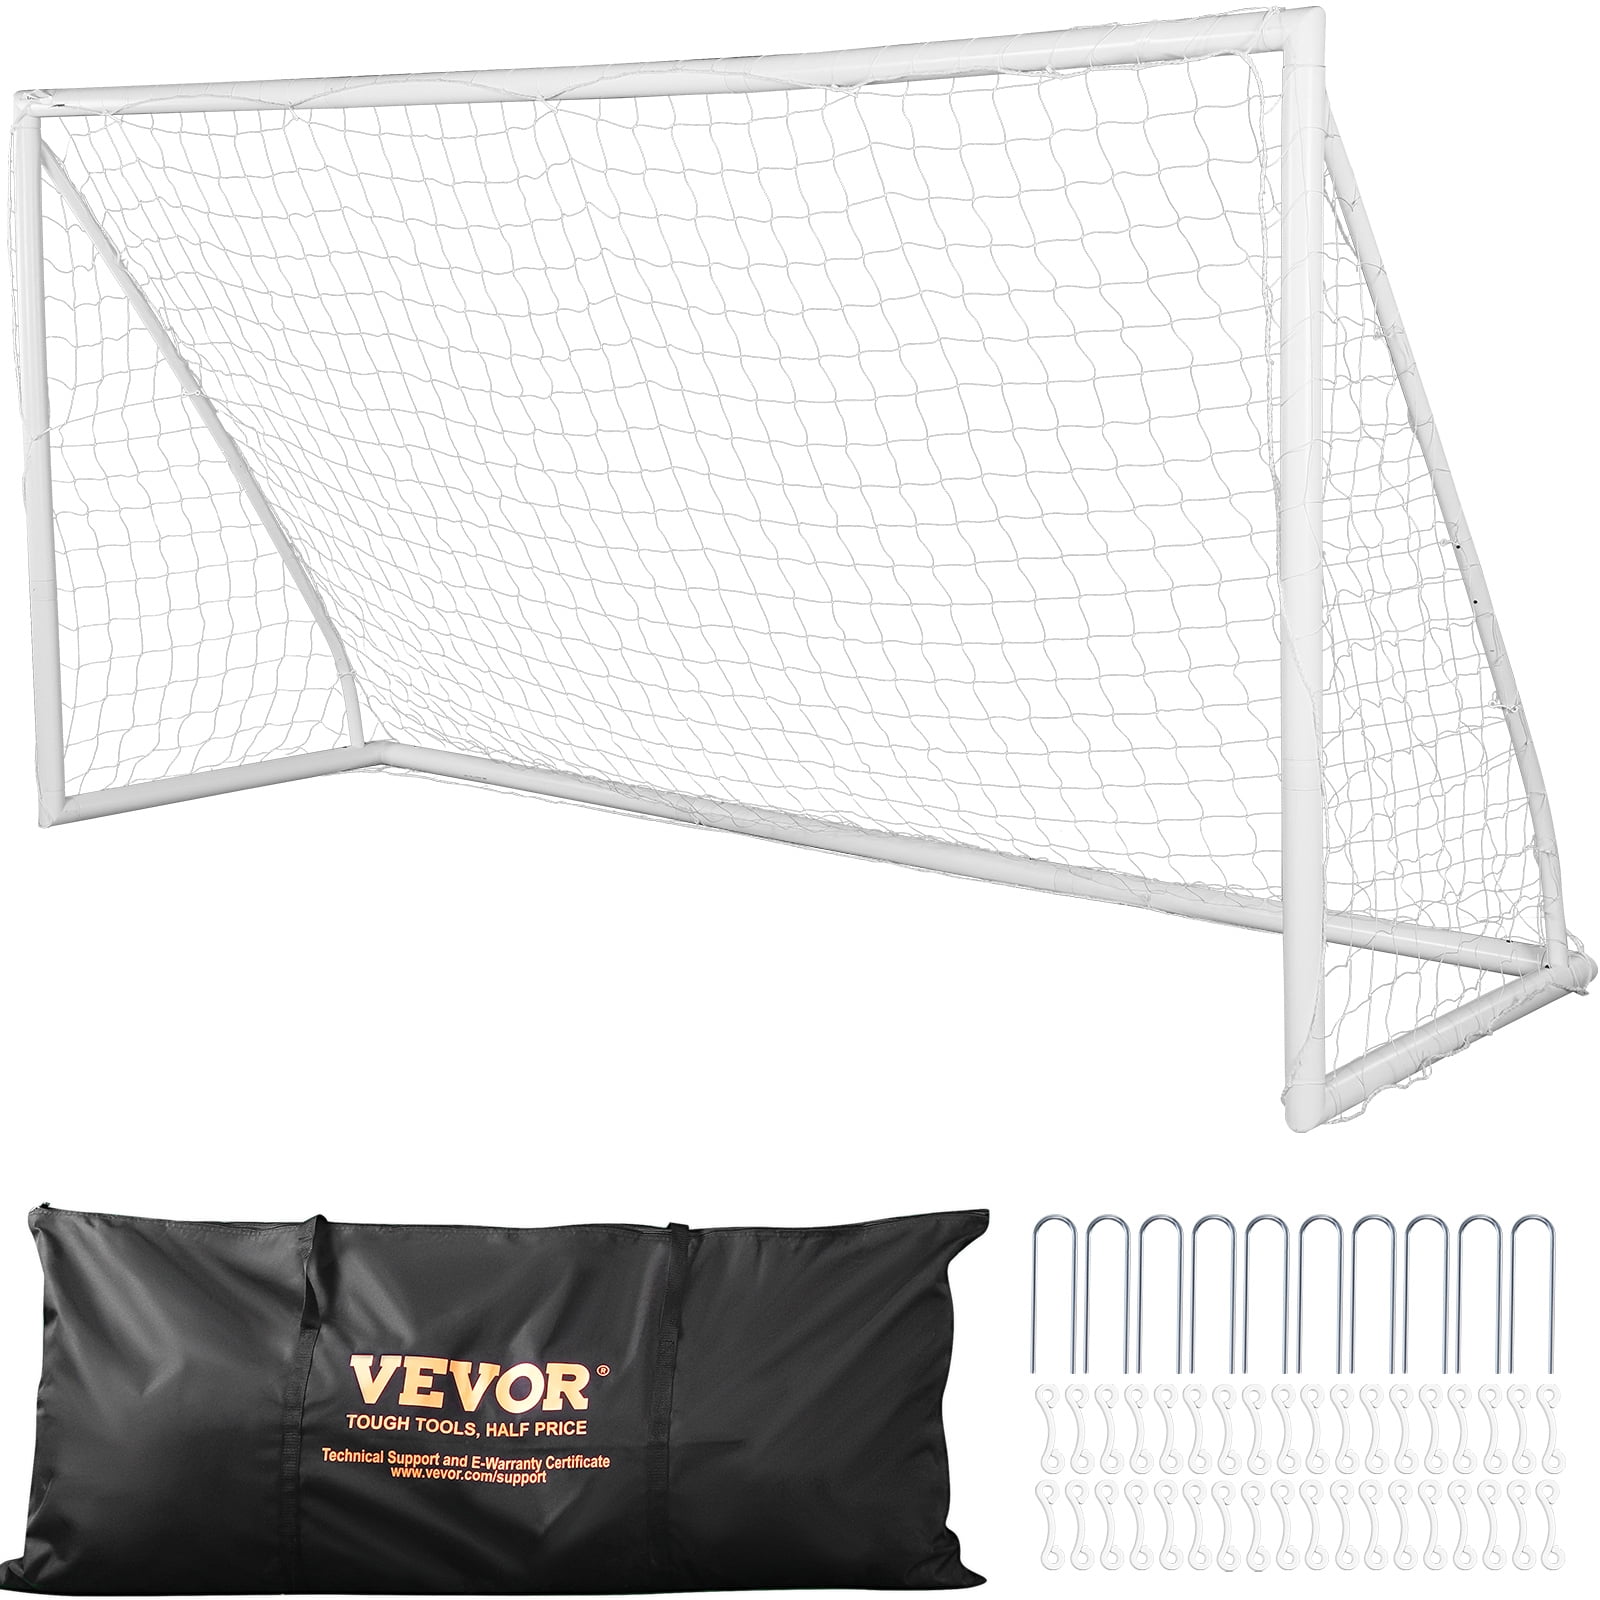 Gymax 12 x 6FT All-Weather Soccer Goal w/Strong UPVC Frame Kids Adults  Soccer Practice 